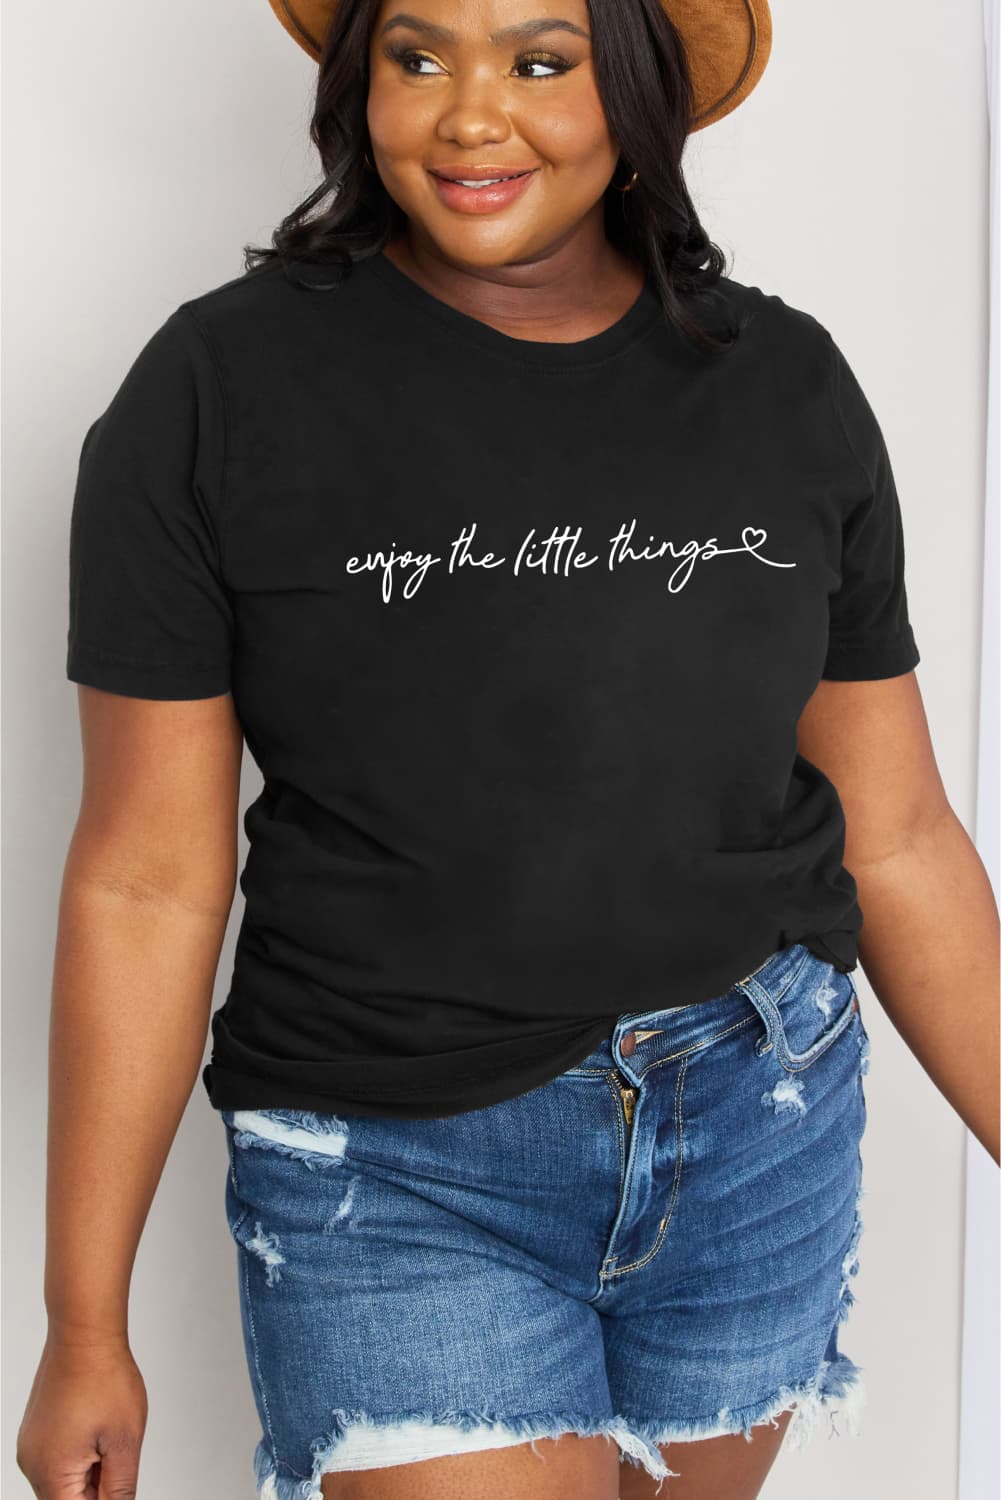 Simply Love Full Size ENJOY THE LITTLE THINGS Graphic Cotton Tee